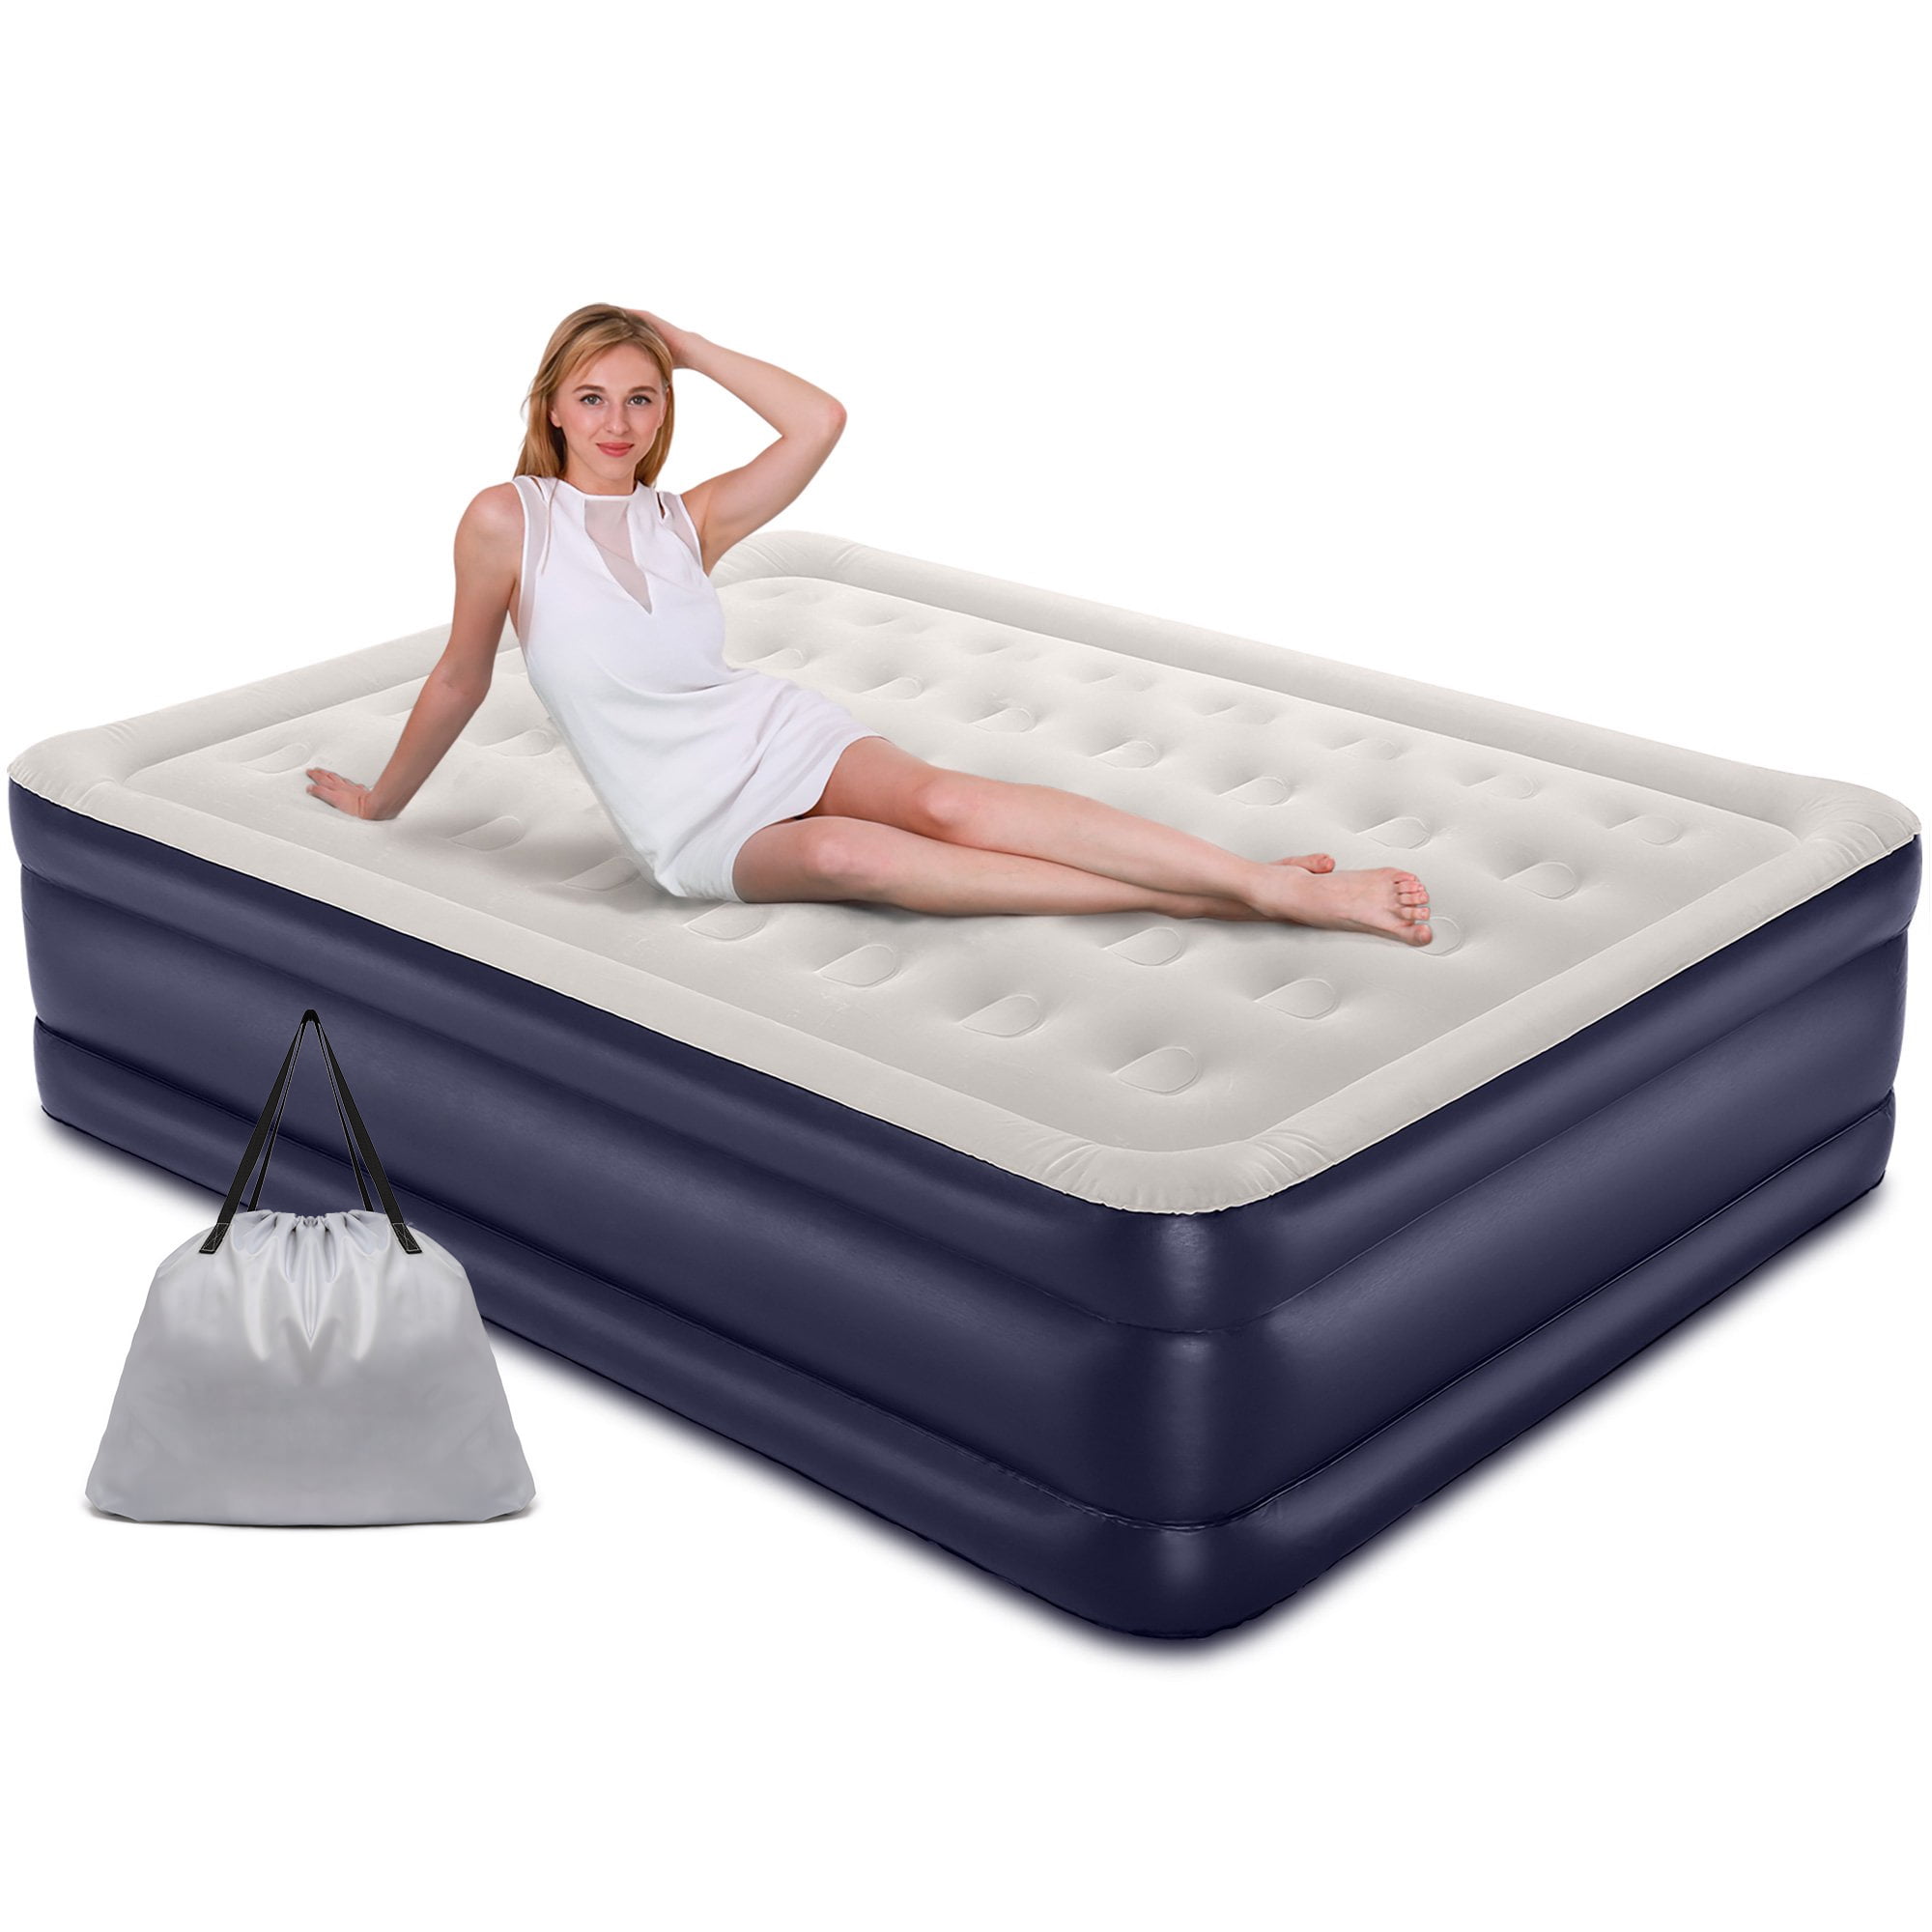 Intex Ultra Plush Dura Beam Deluxe Airbed with Built In Pump 